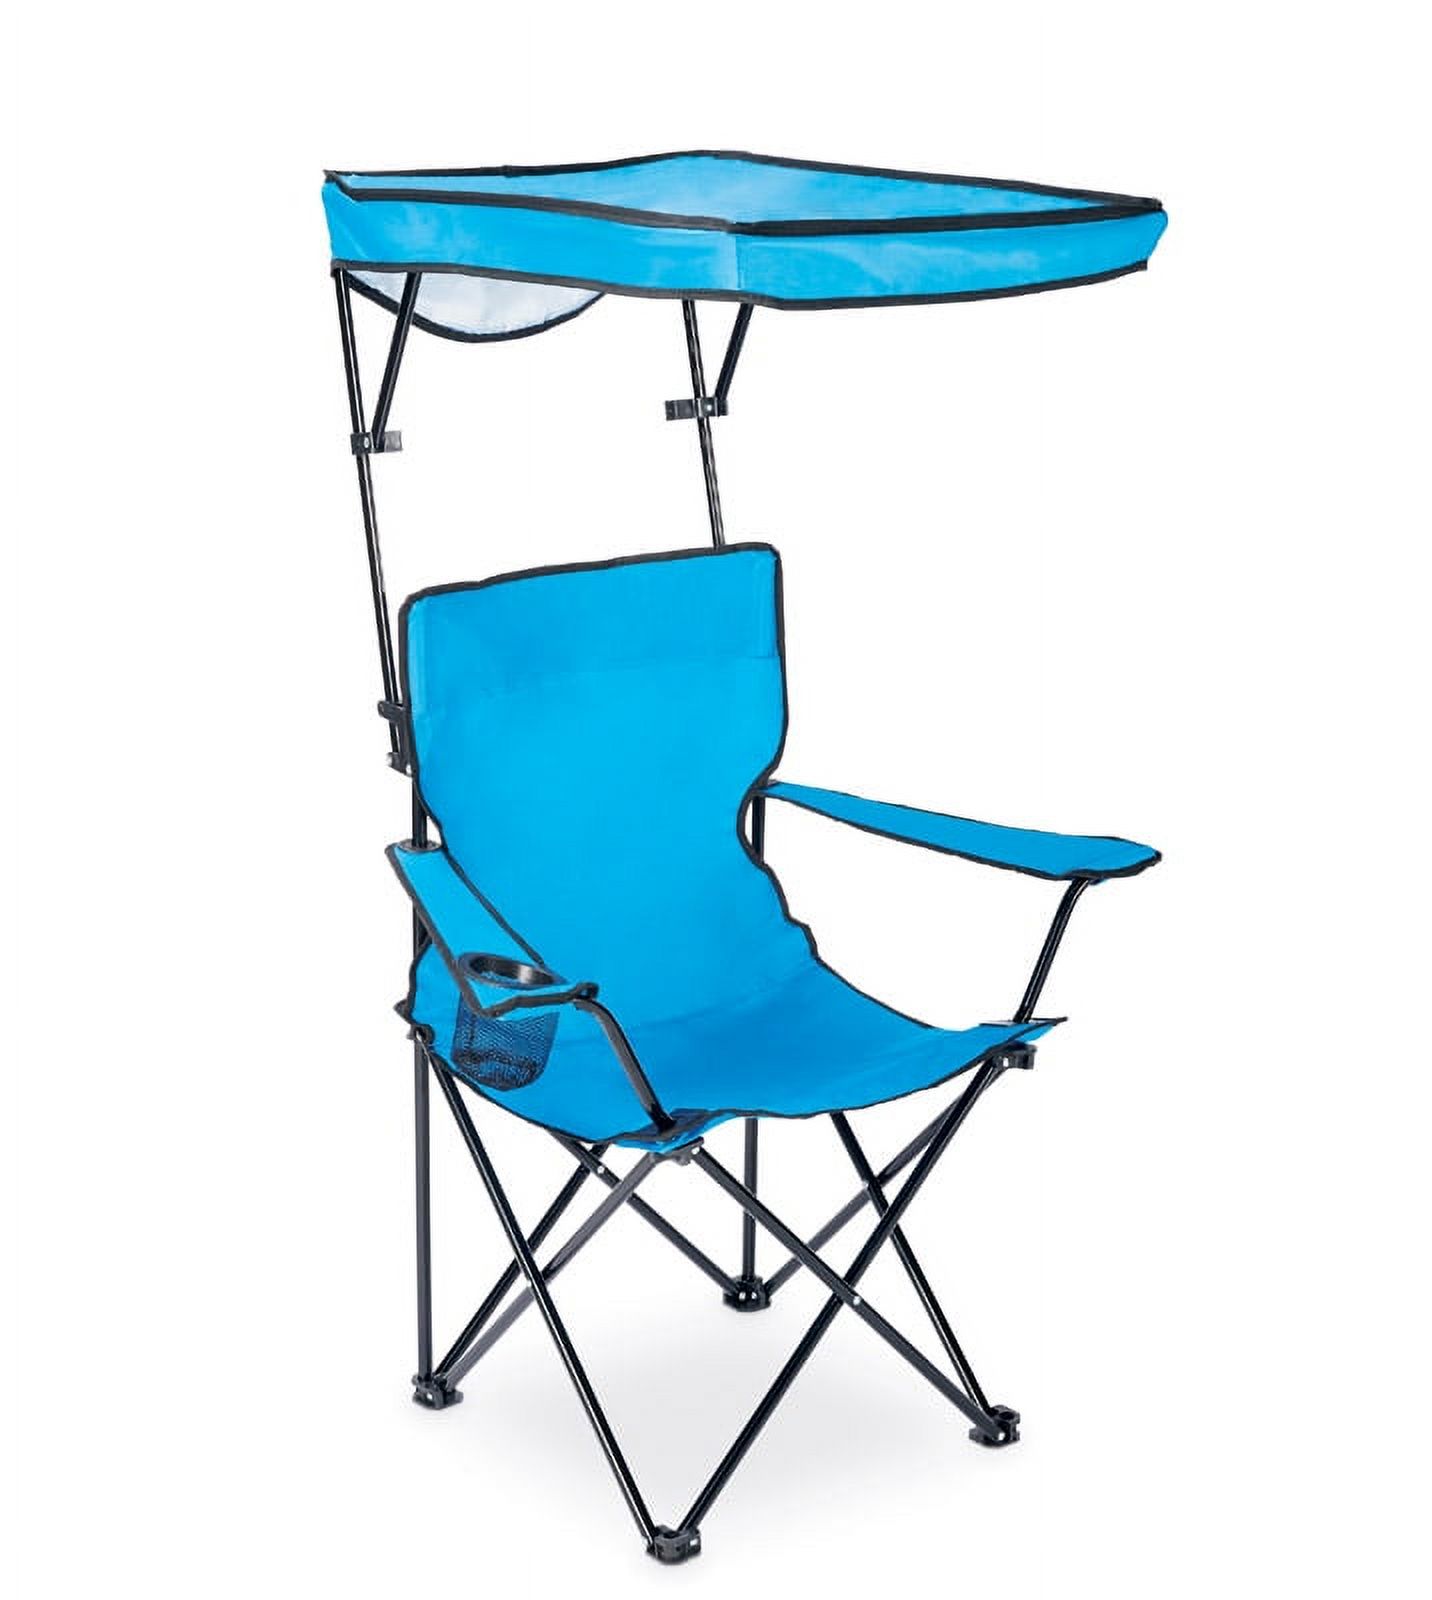 Quik Shade Basic Adjustable Blue Canopy Chair - image 3 of 4